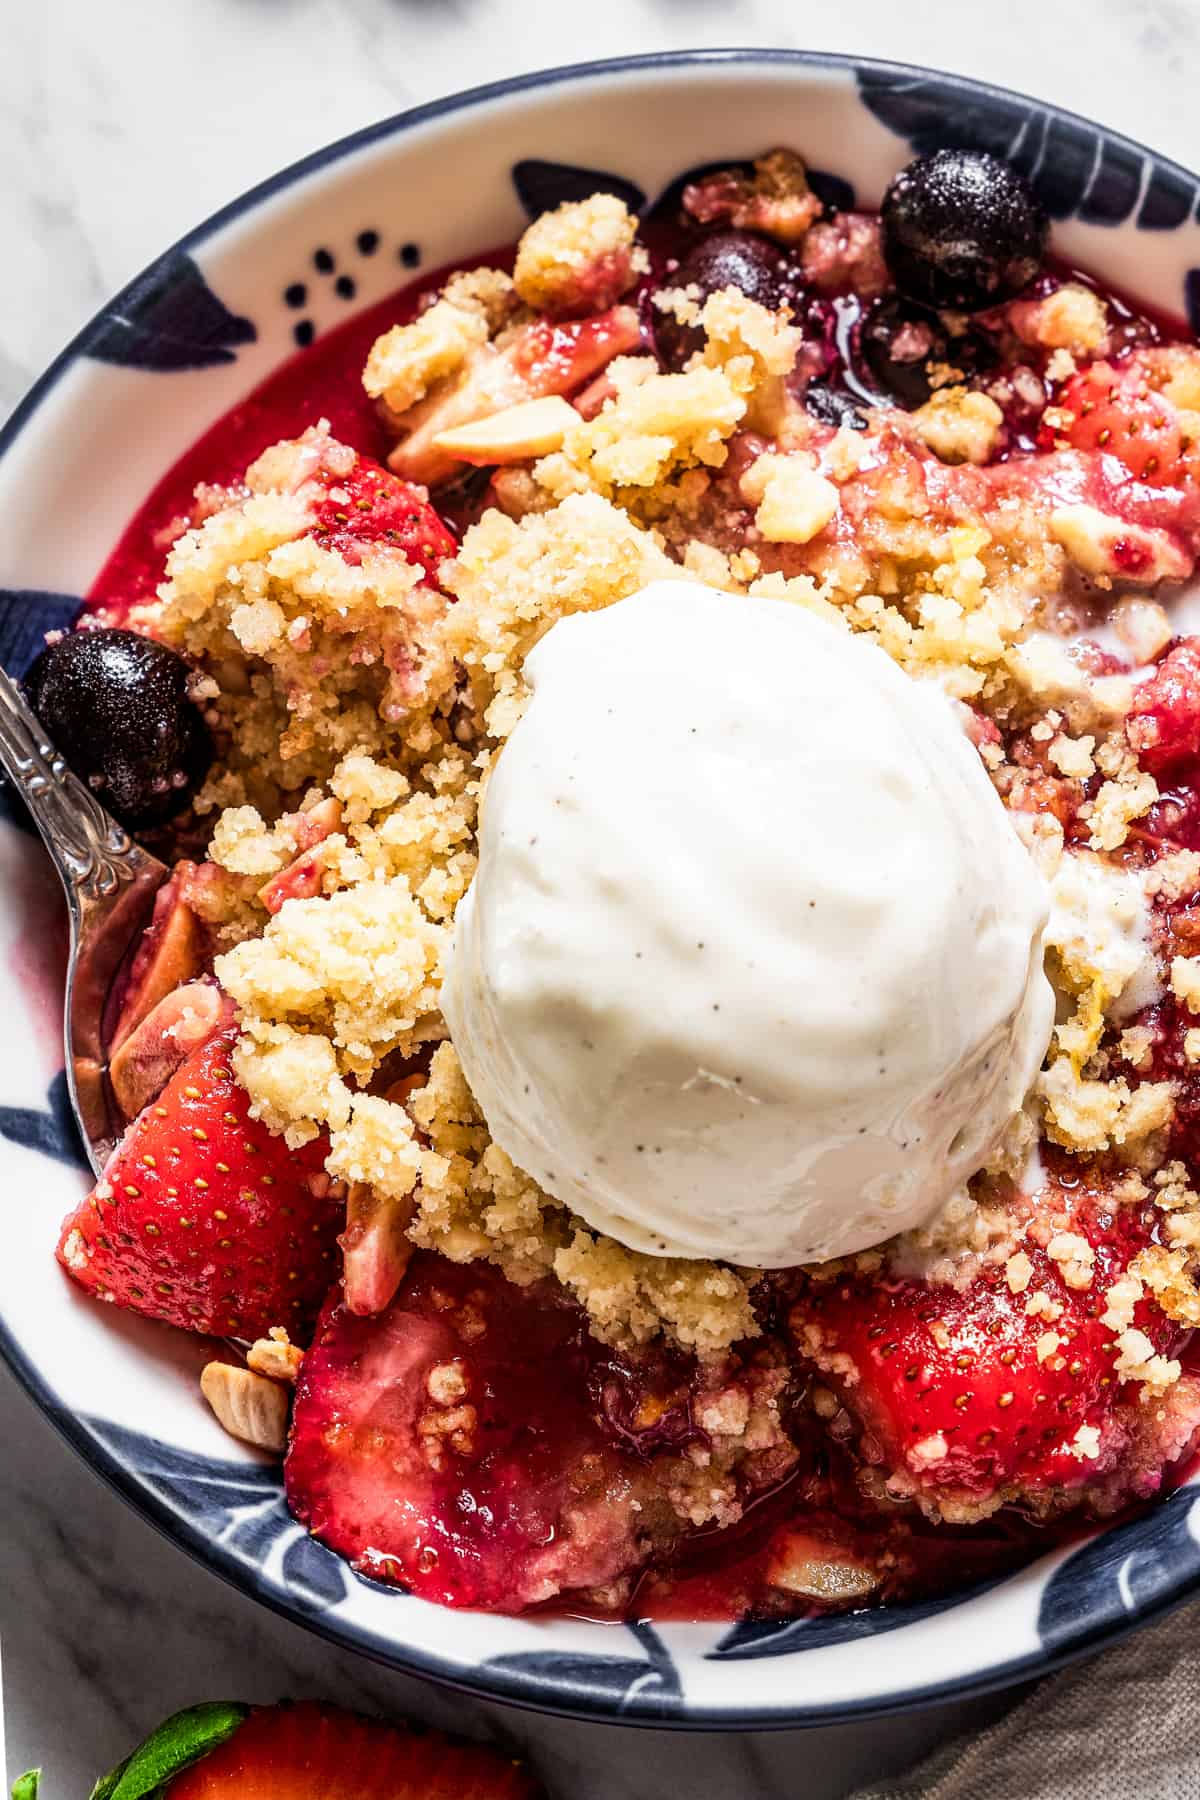 Overhead close-up shot of a bowl with blueberry strawberry crumble, and a scoop of vanilla ice cream on top.